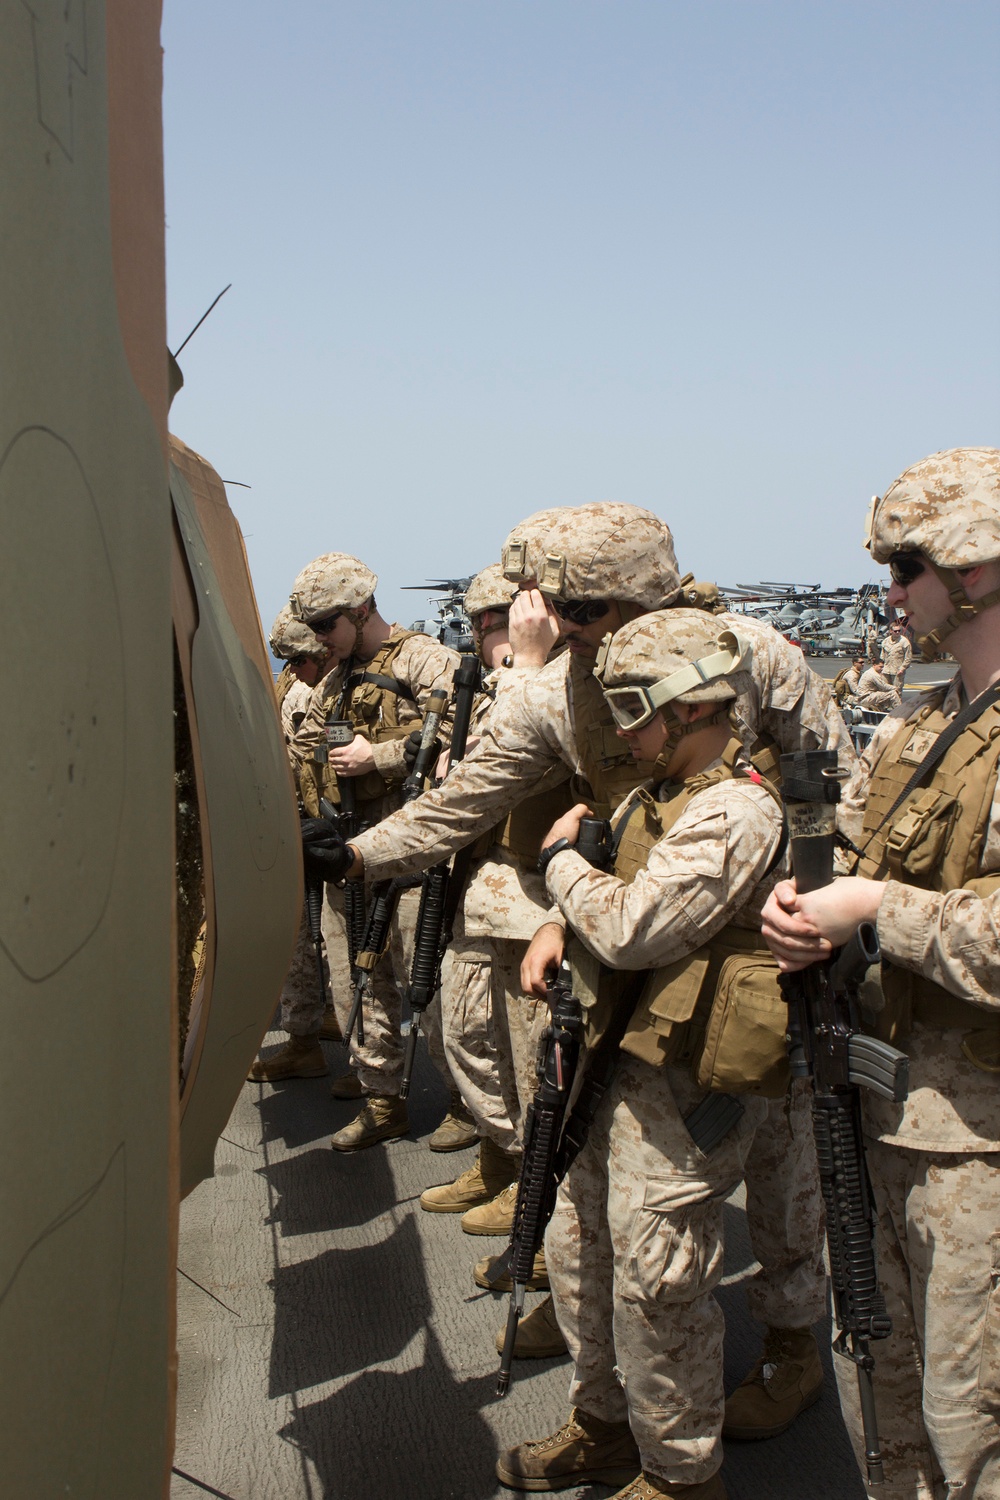 U.S. Marines assigned to the Command Element, 26th Marine Expeditionary Unit, conduct a live fire range